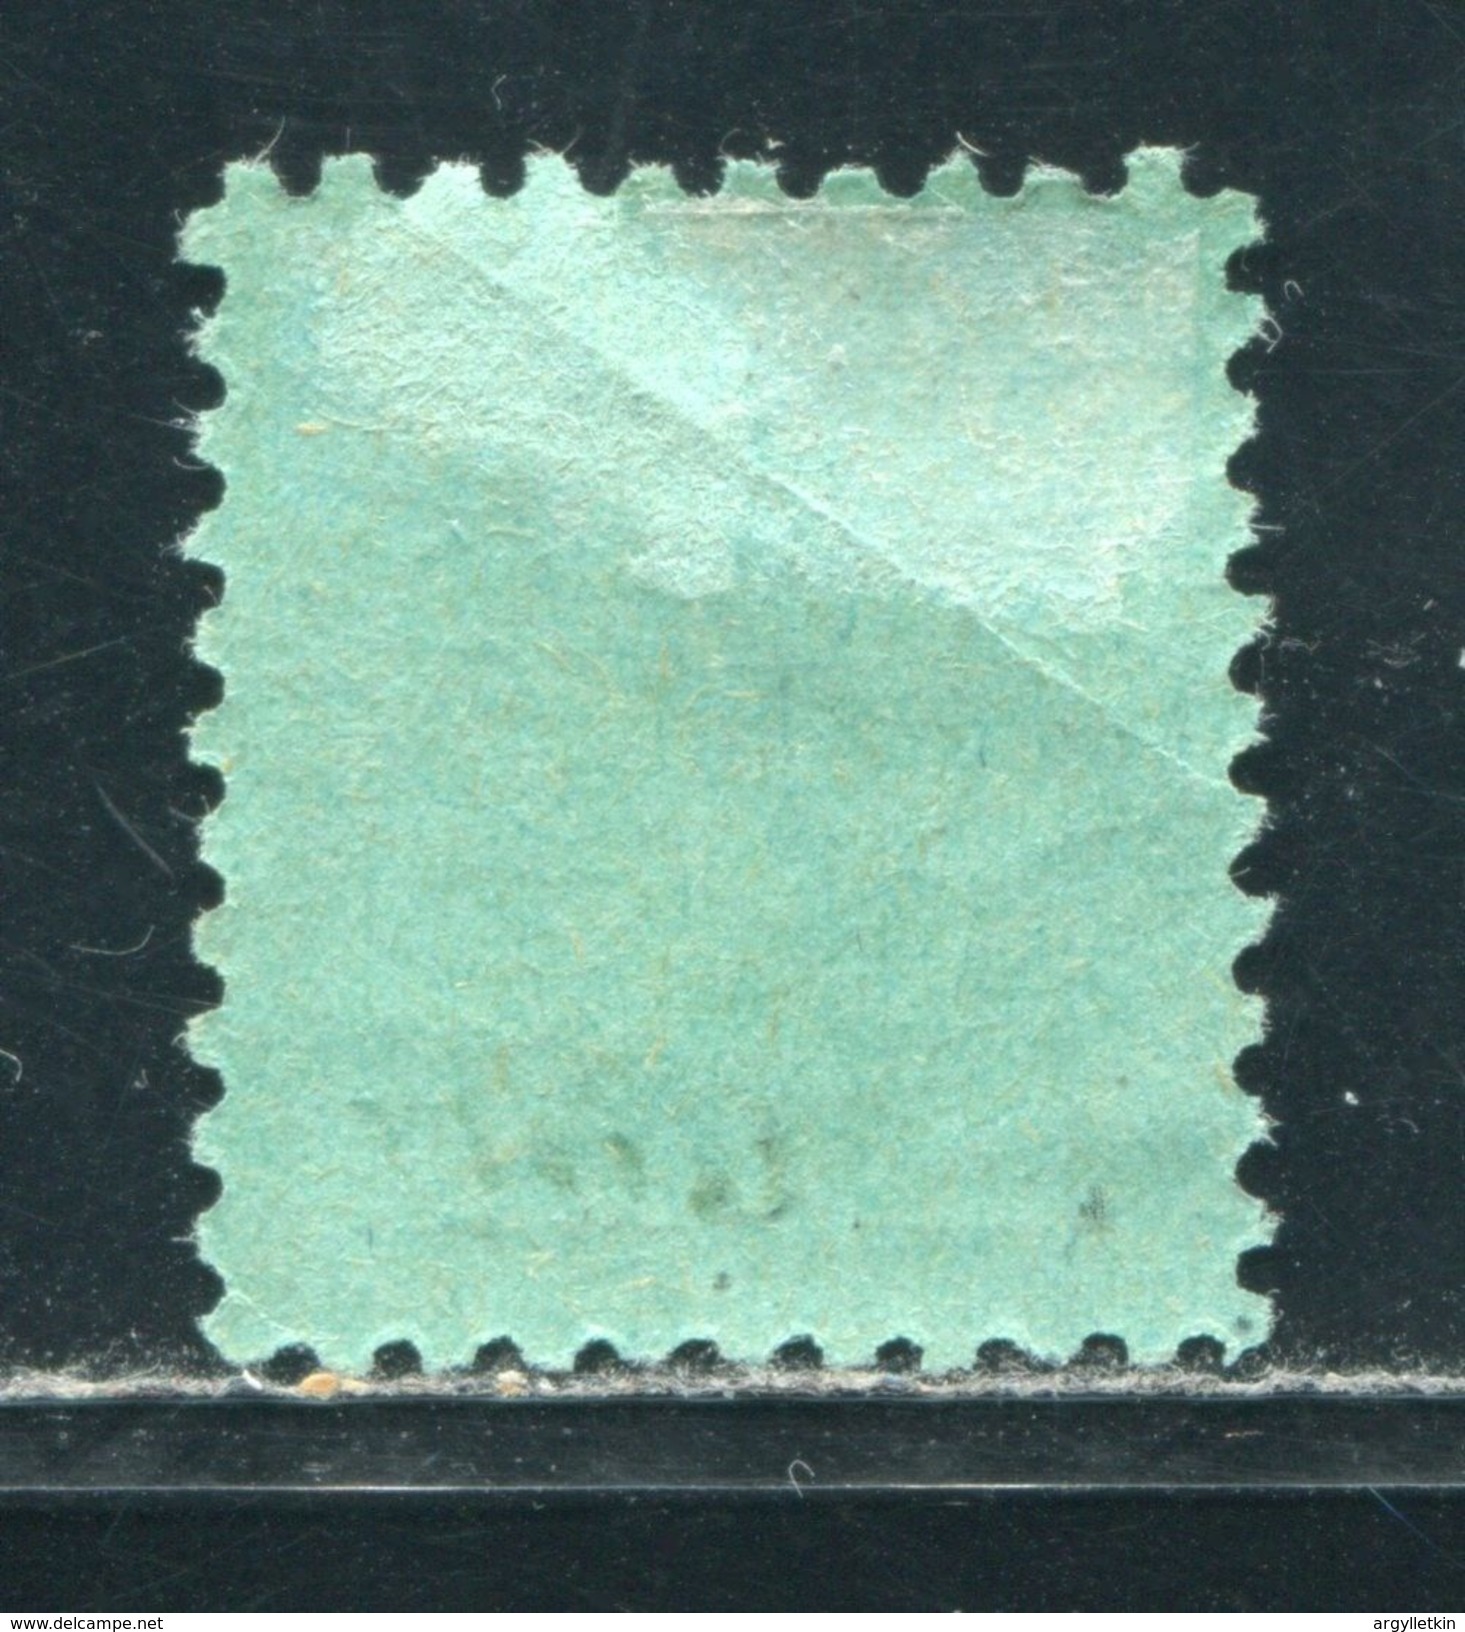 NORWAY ARENDAL TOWN POST NEWSPAPER STAMP 1886 - Local Post Stamps